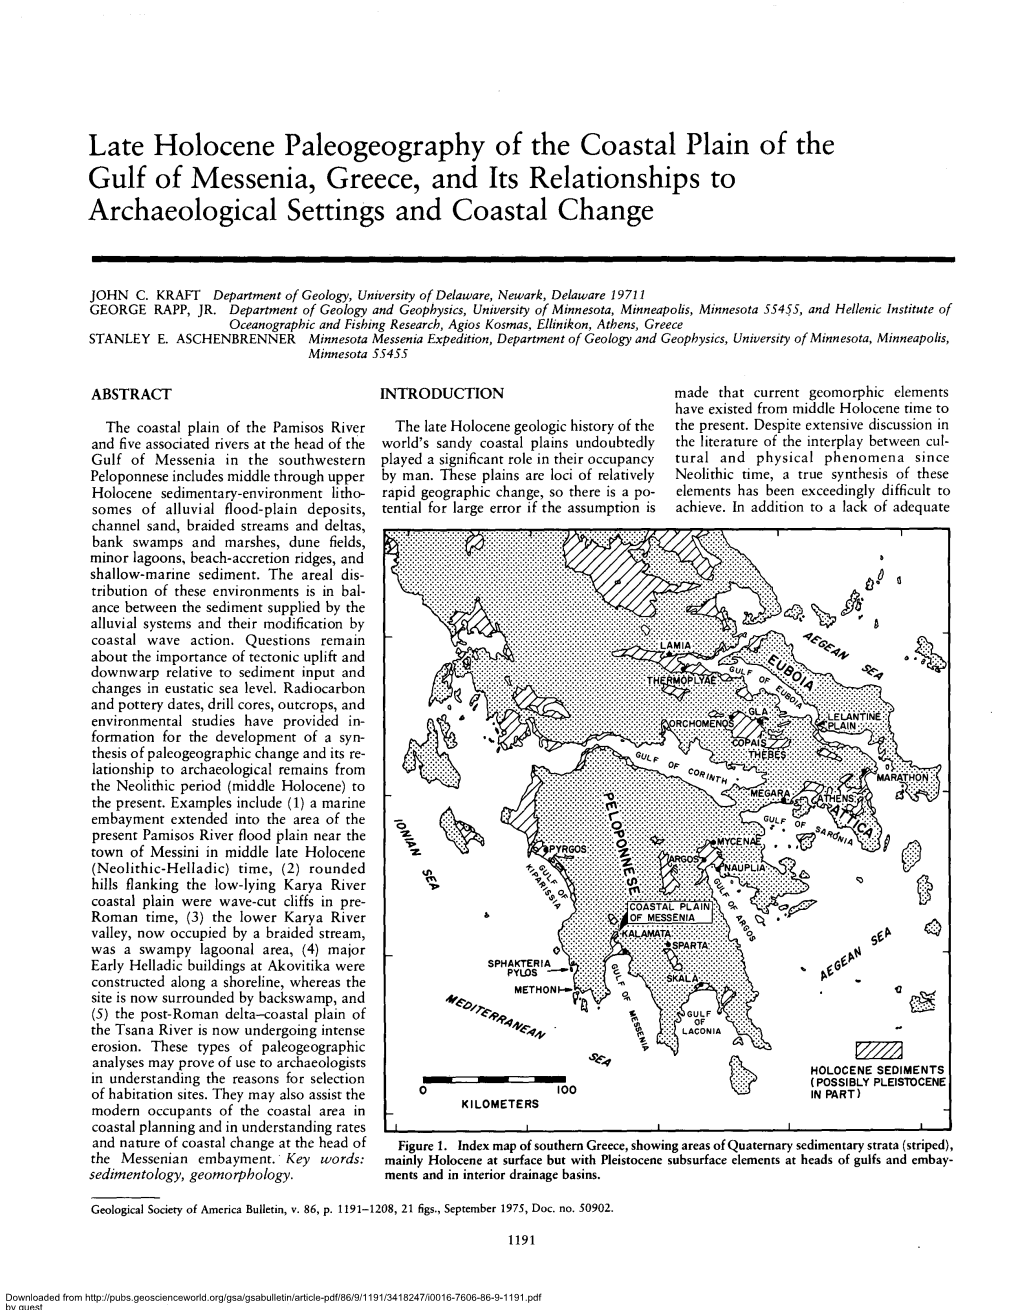 Late Holocene Paleogeography of the Coastal Plain of the Gulf of Messenia, Greece, and Its Relationships to Archaeological Settings and Coastal Change